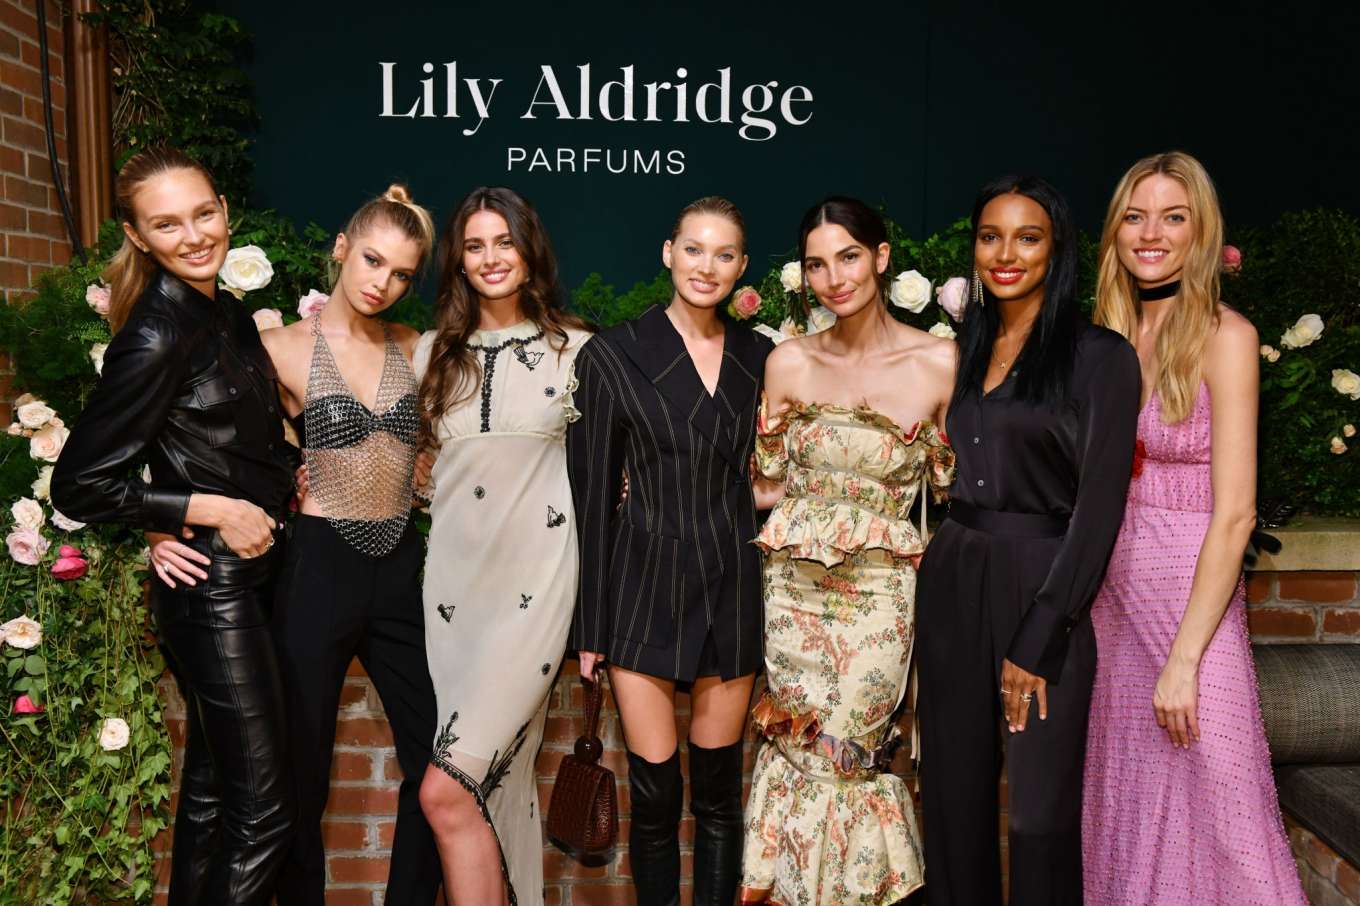 Taylor Hill 2019 : Taylor Hill – Lily Aldridge Parfums Launch Event in NYC-17